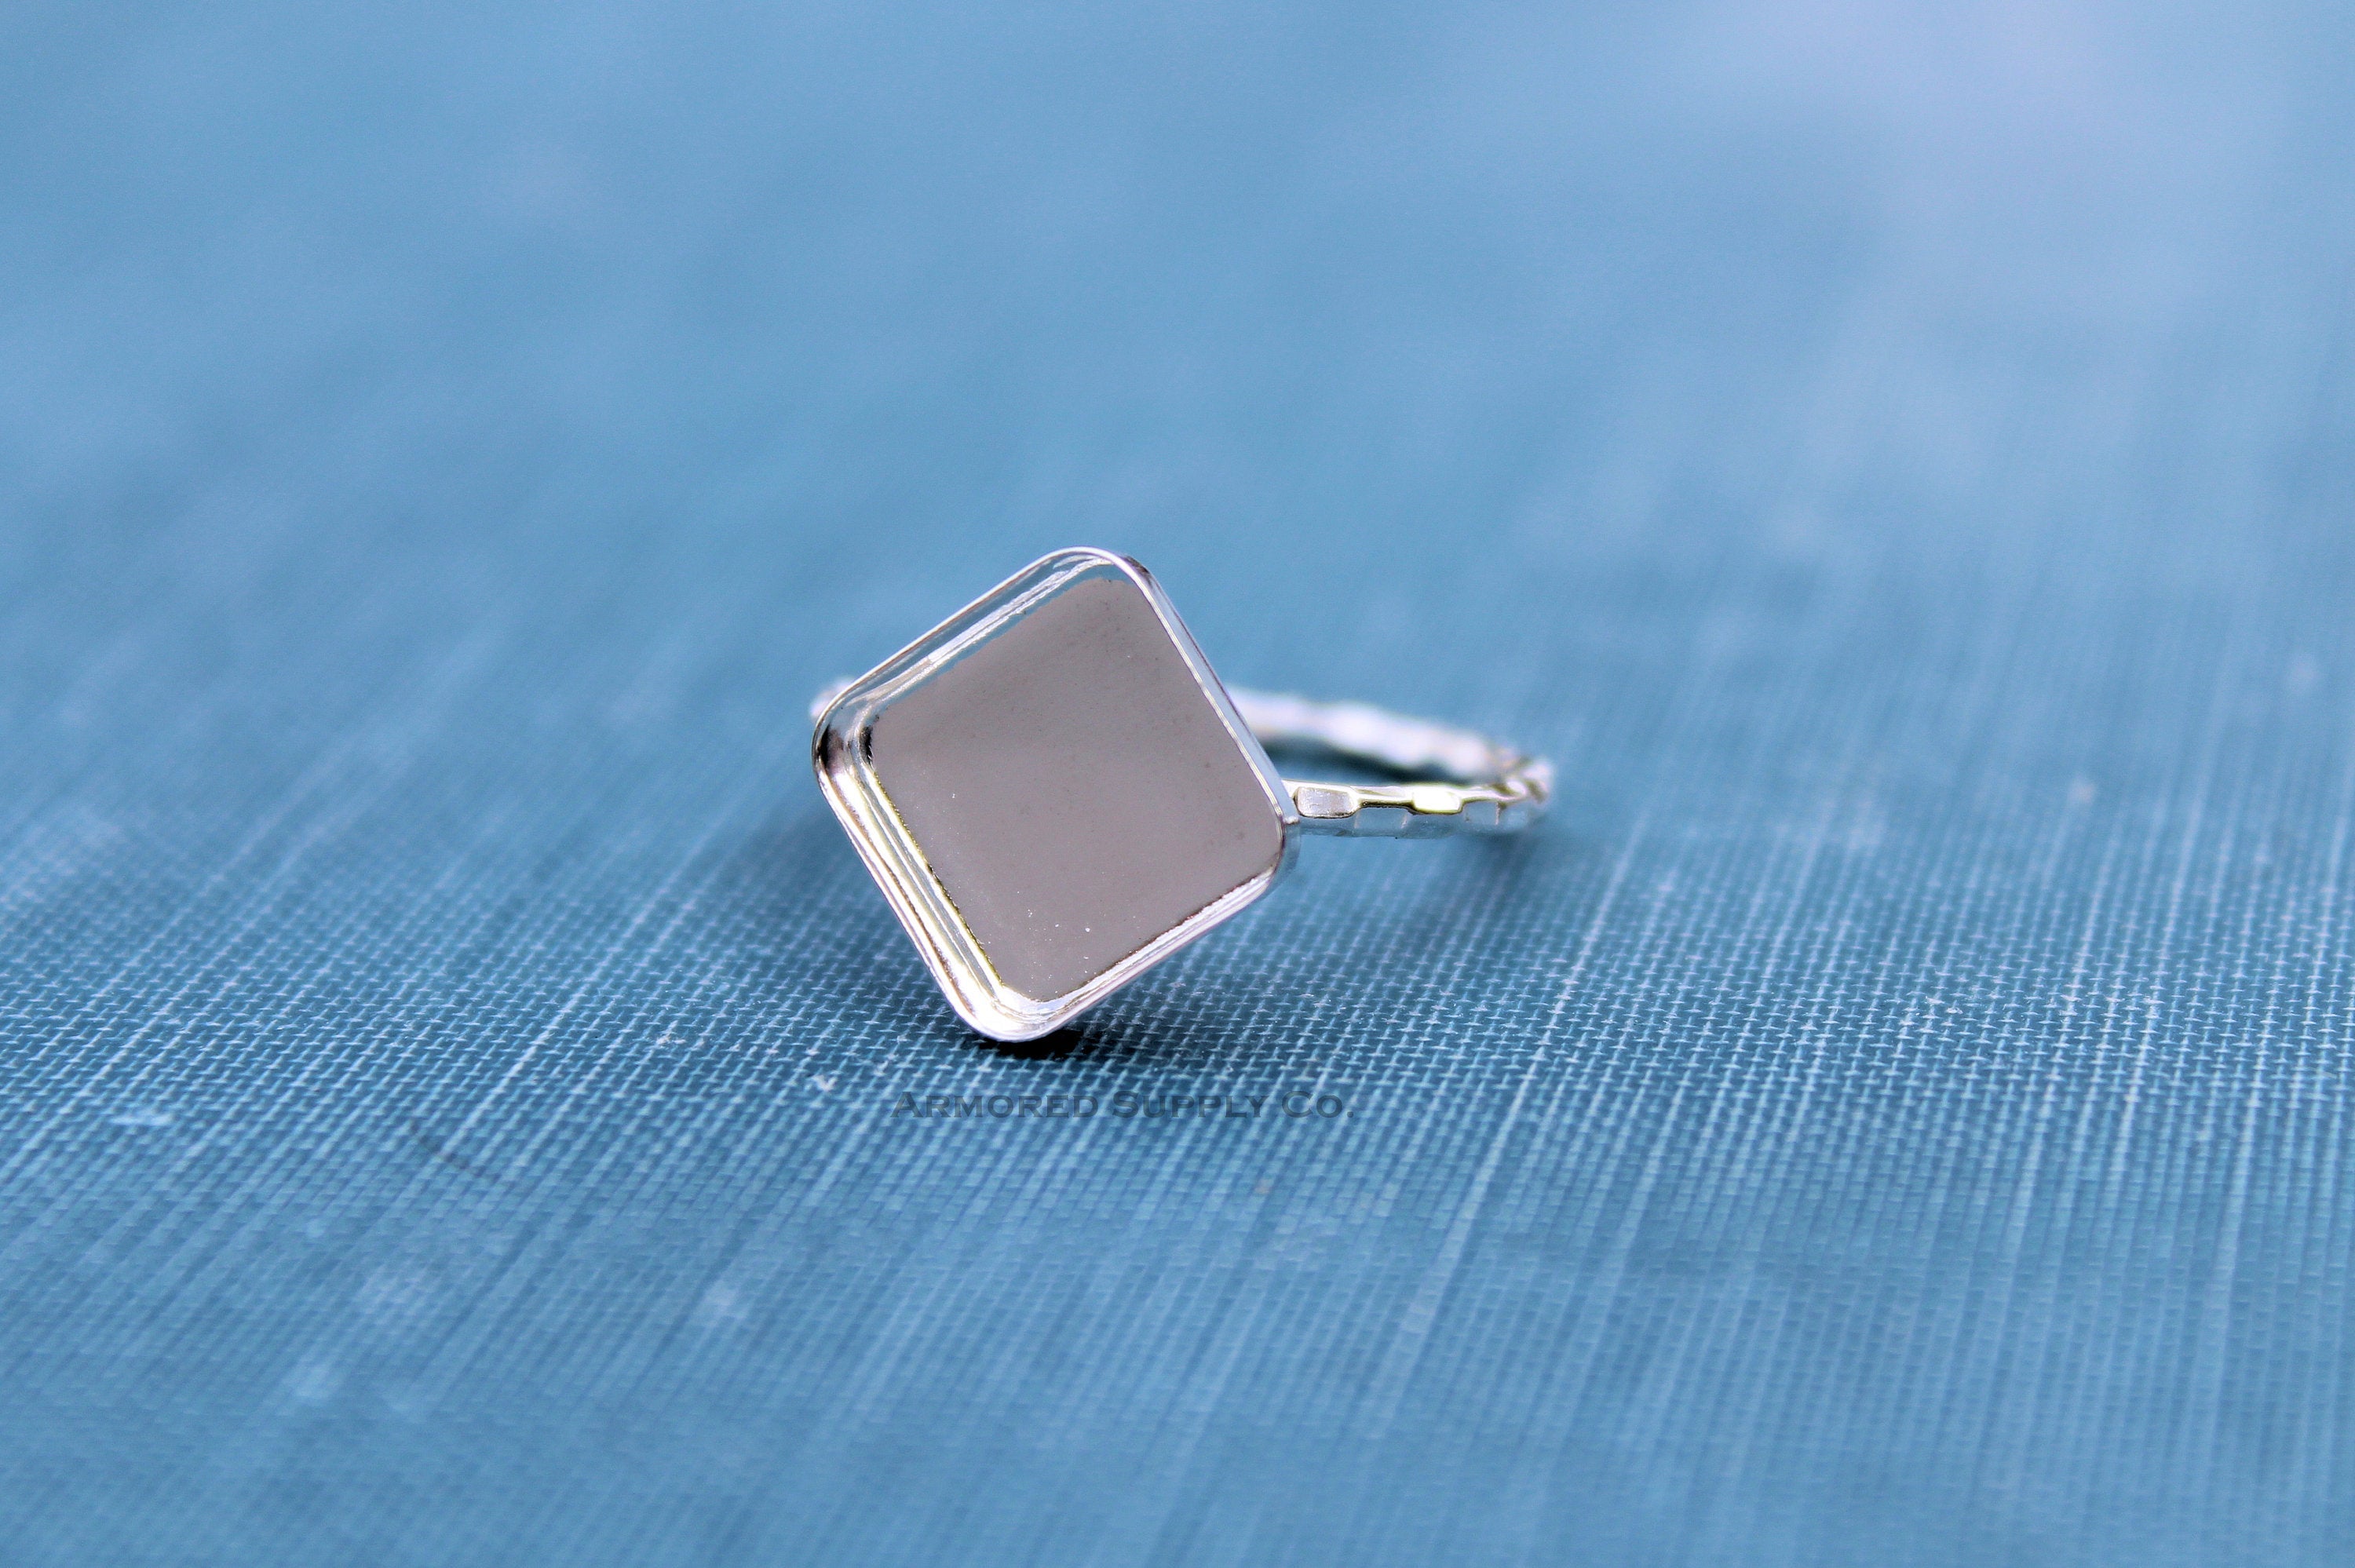 Silver Checkered Square Bezel Cup Ring blank, Cabochon, Cab Resin Pad Breast Milk, DIY jewelry supplies, build your ring, wholesale jewelry